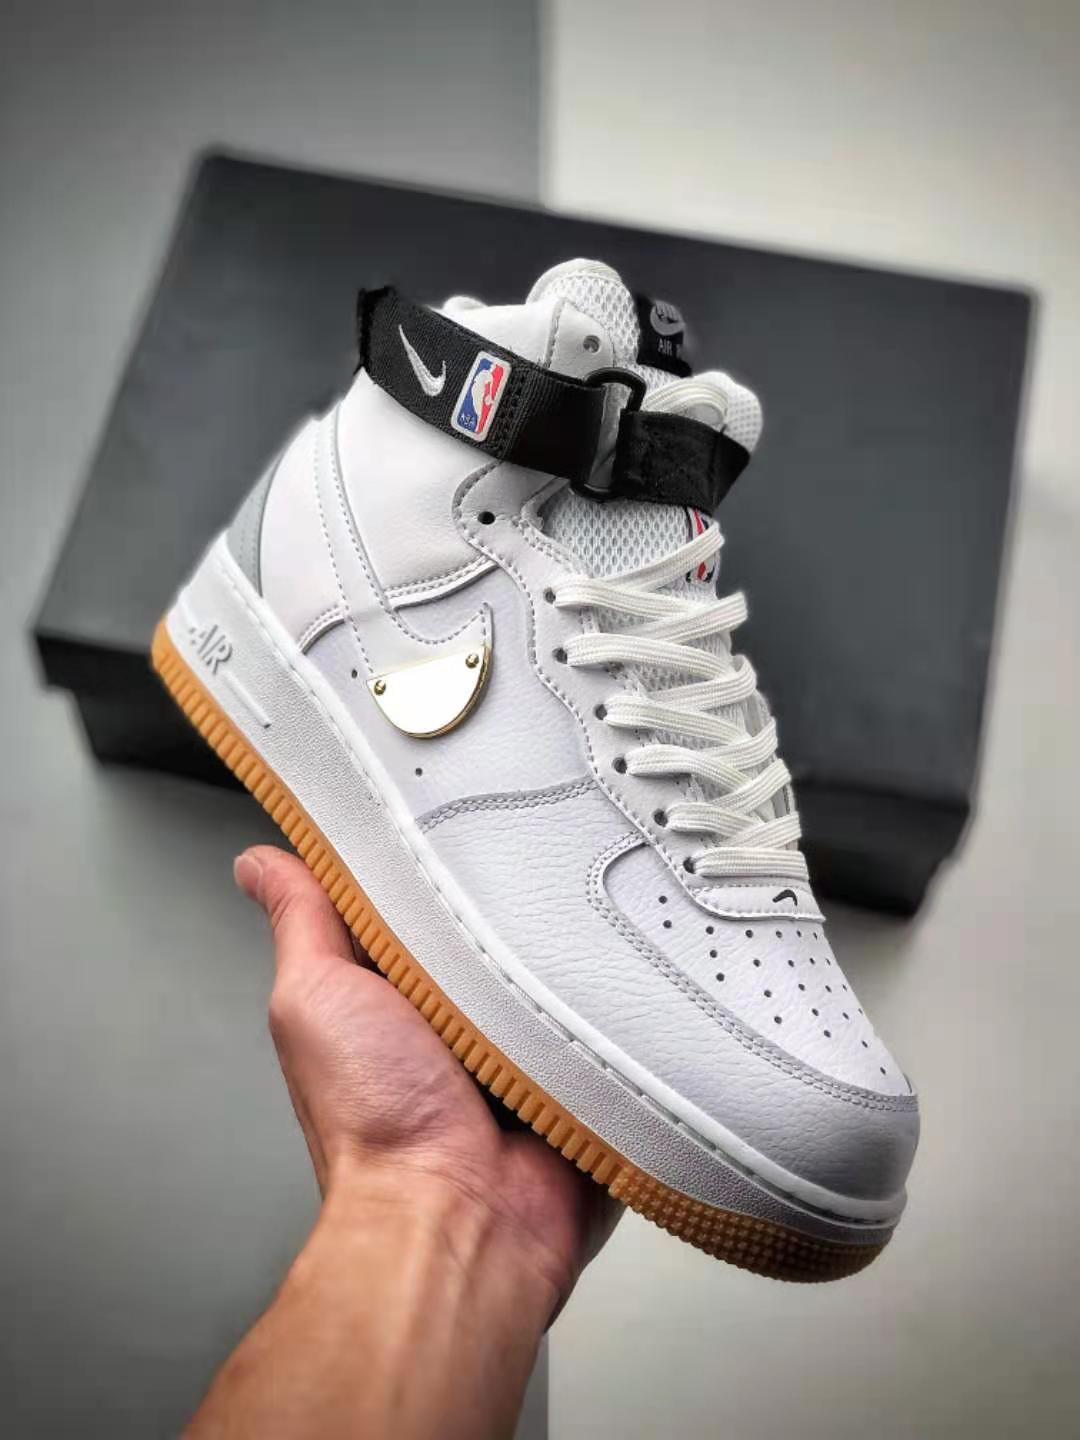 Nike NBA Air Force 1 High '07 LV8 'White' CT2306-100: Classic Style for Basketball Fans